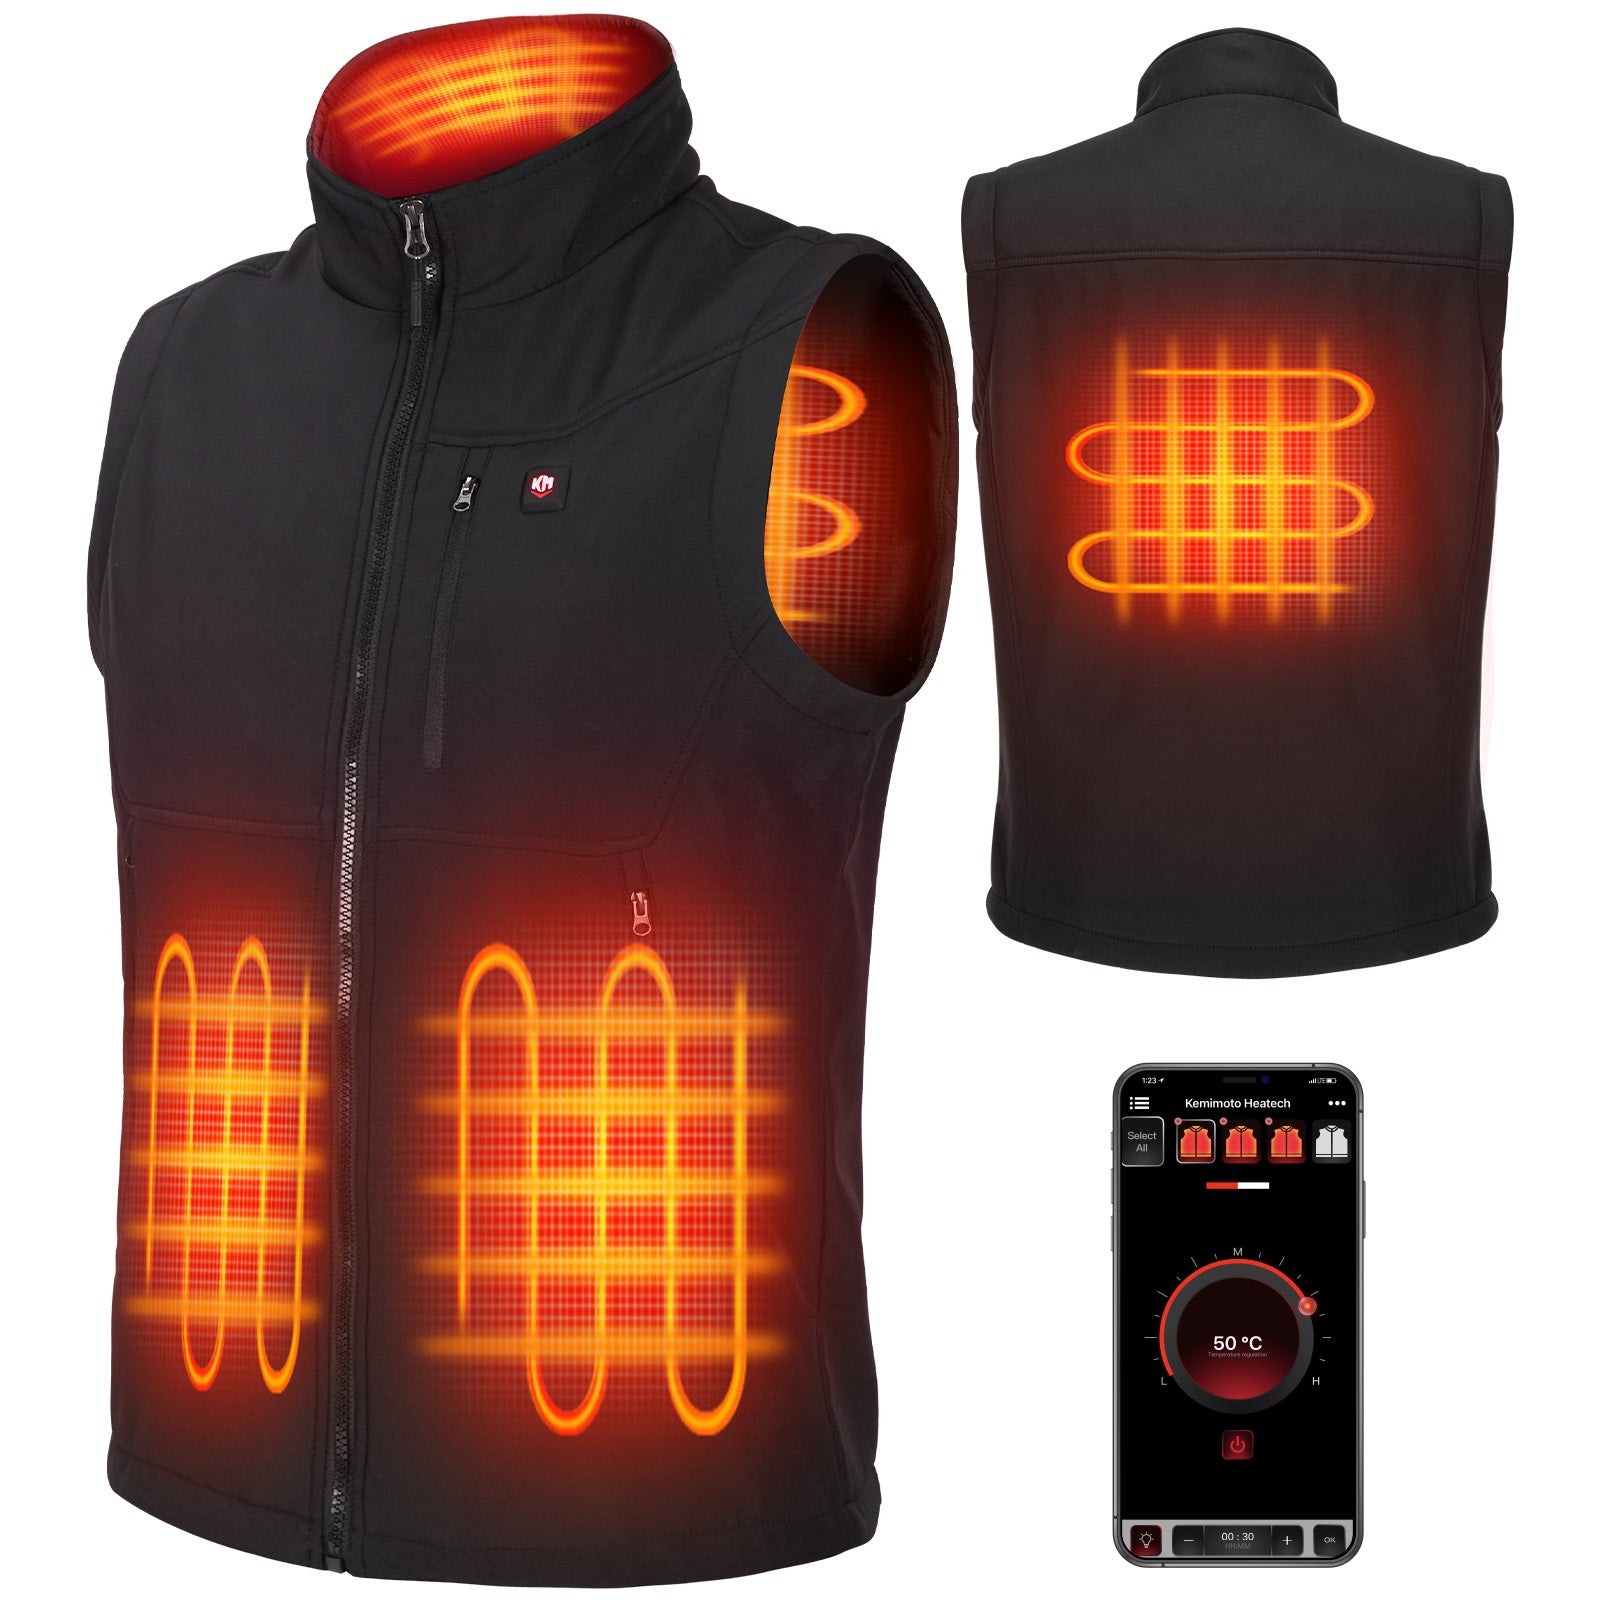 Men's Heated Vest by APP Temp Control for Skiing Hiking Hunting - Kemimoto